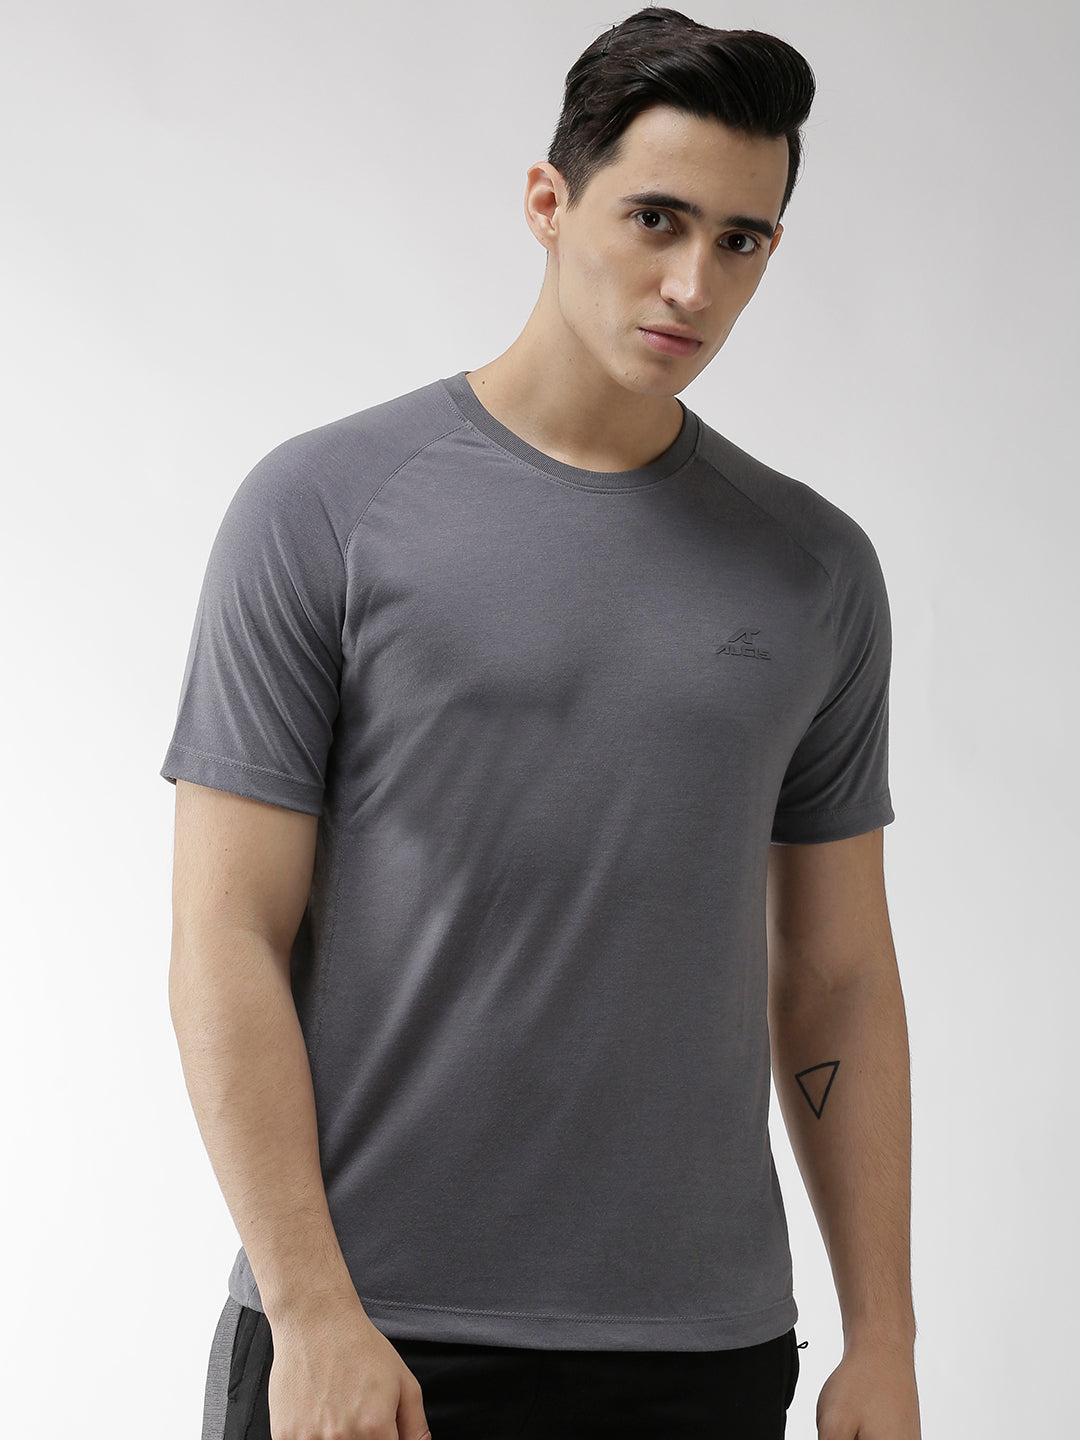 Alcis Men Charcoal Grey Solid Round Neck Slim Fit Training T-shirt